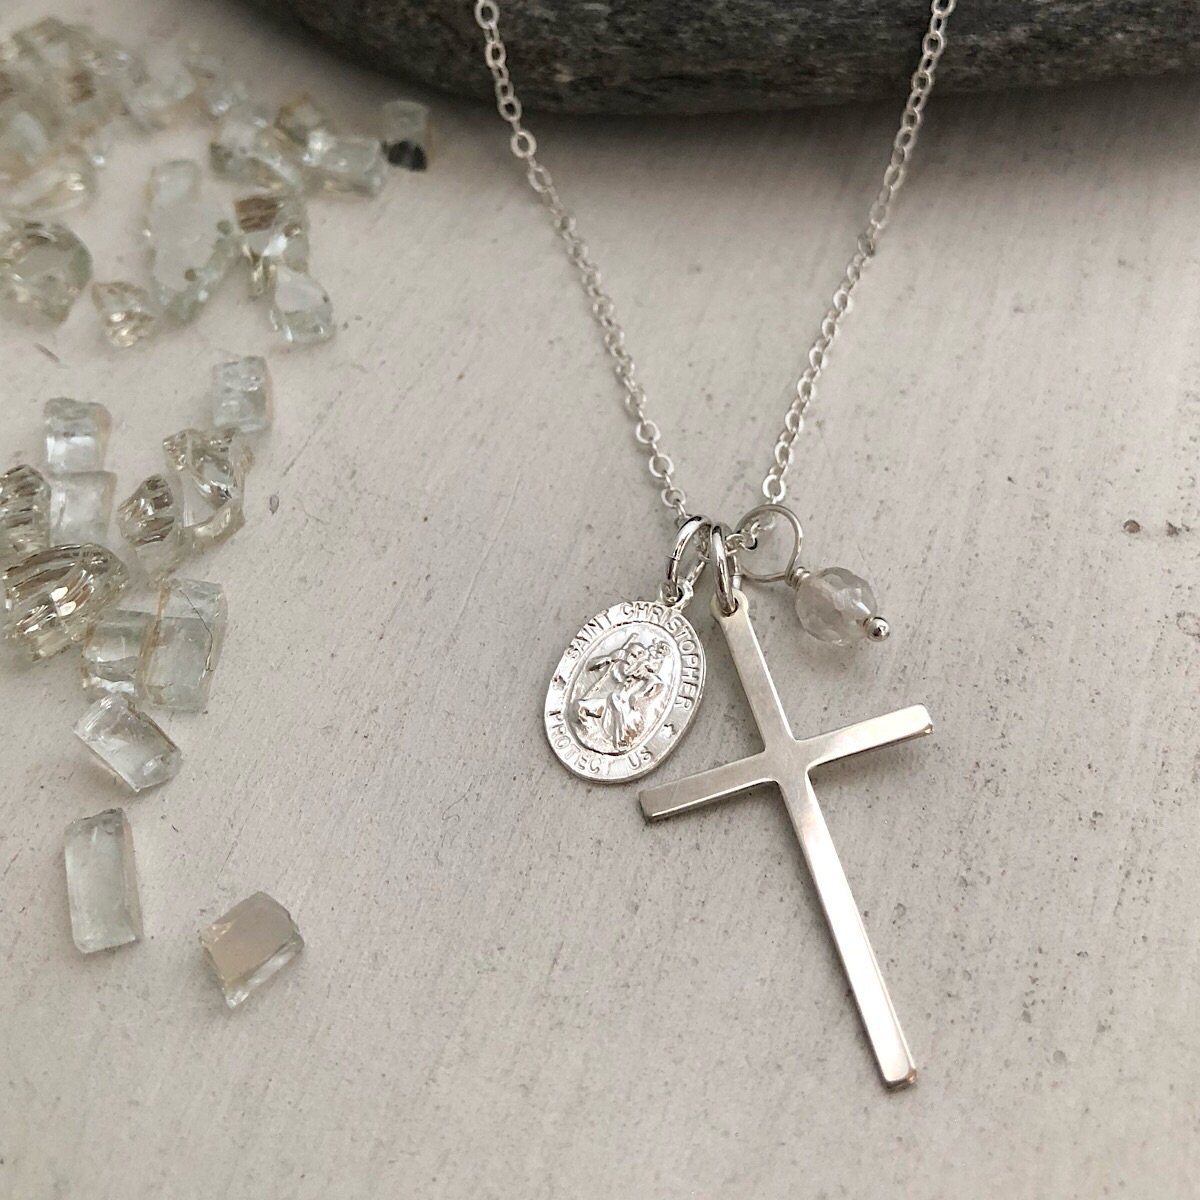 St. Christopher Travelers Charm Necklace  - IsabelleGraceJewelry